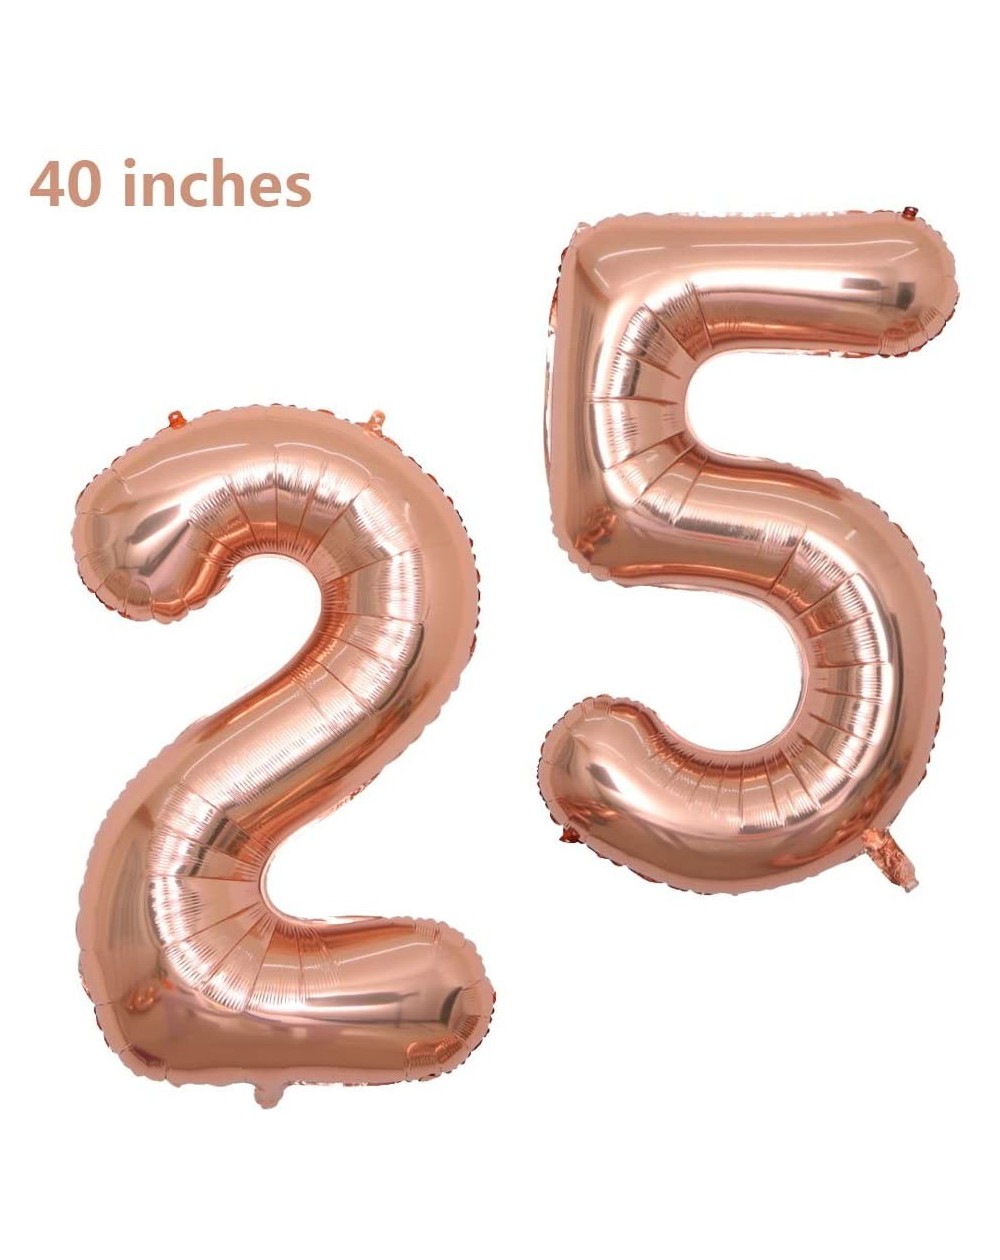 Balloons 40 inch Jumbo 25 Rose Gold Foil Balloons for Birthday Party Supplies-Anniversary Events Decorations and Graduation D...